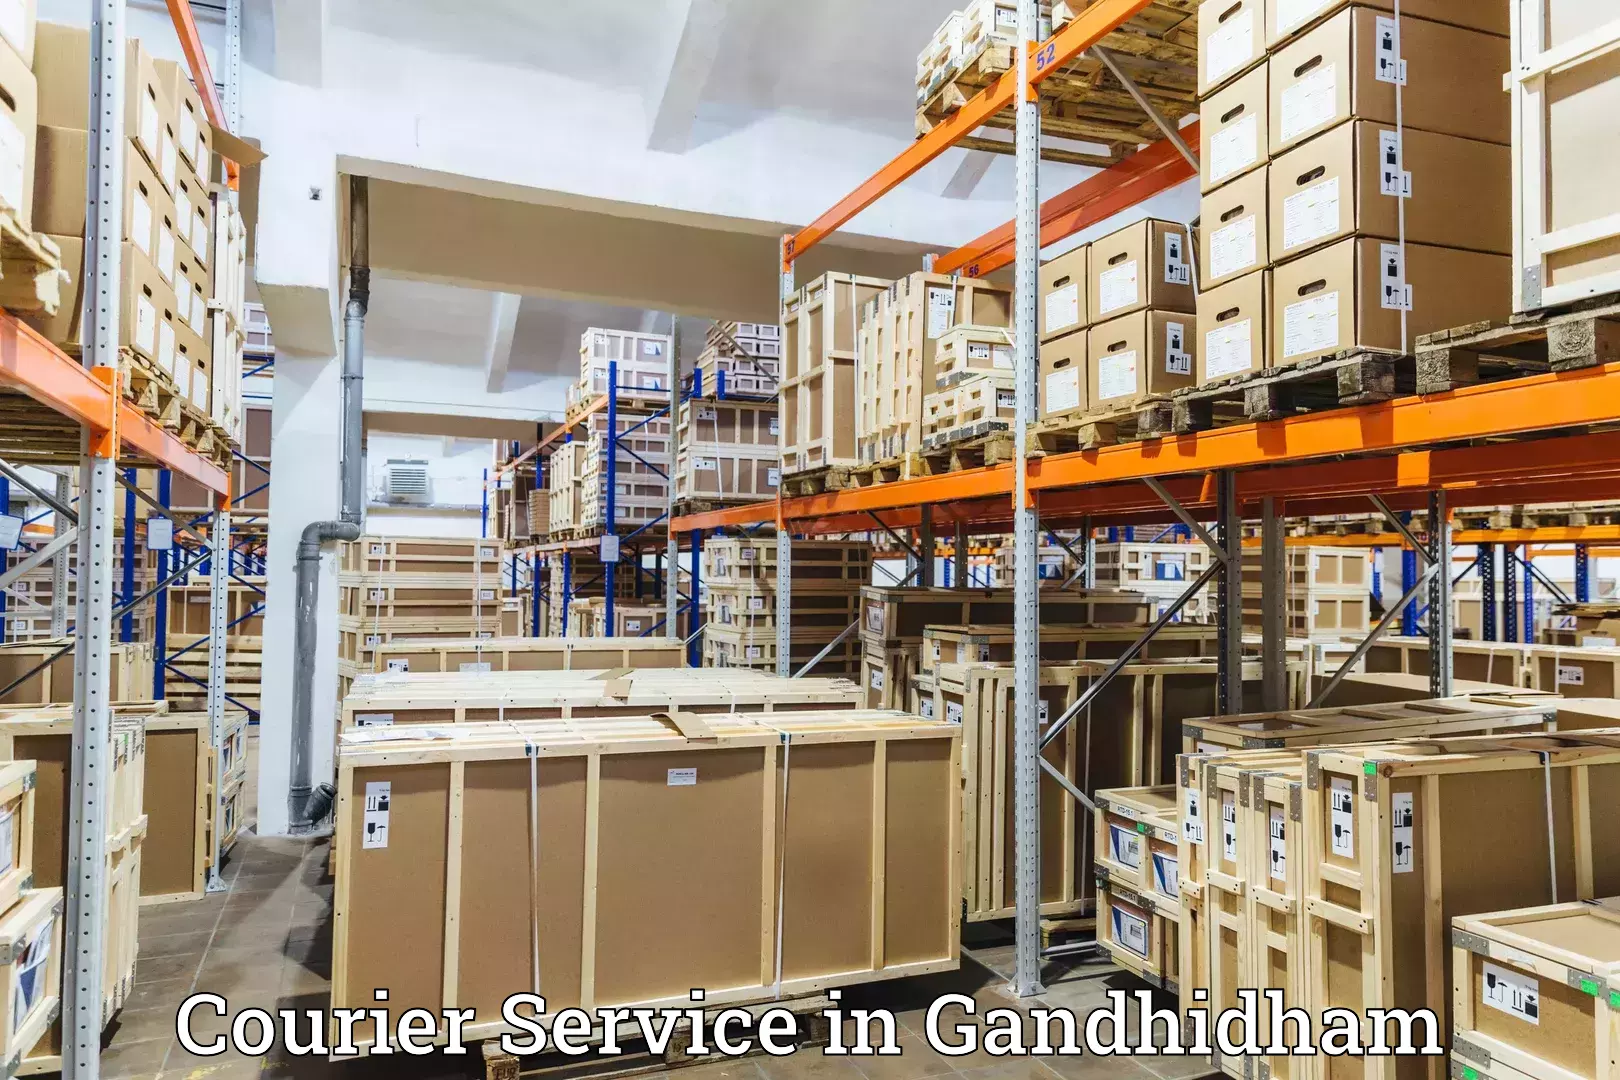 Express package services in Gandhidham